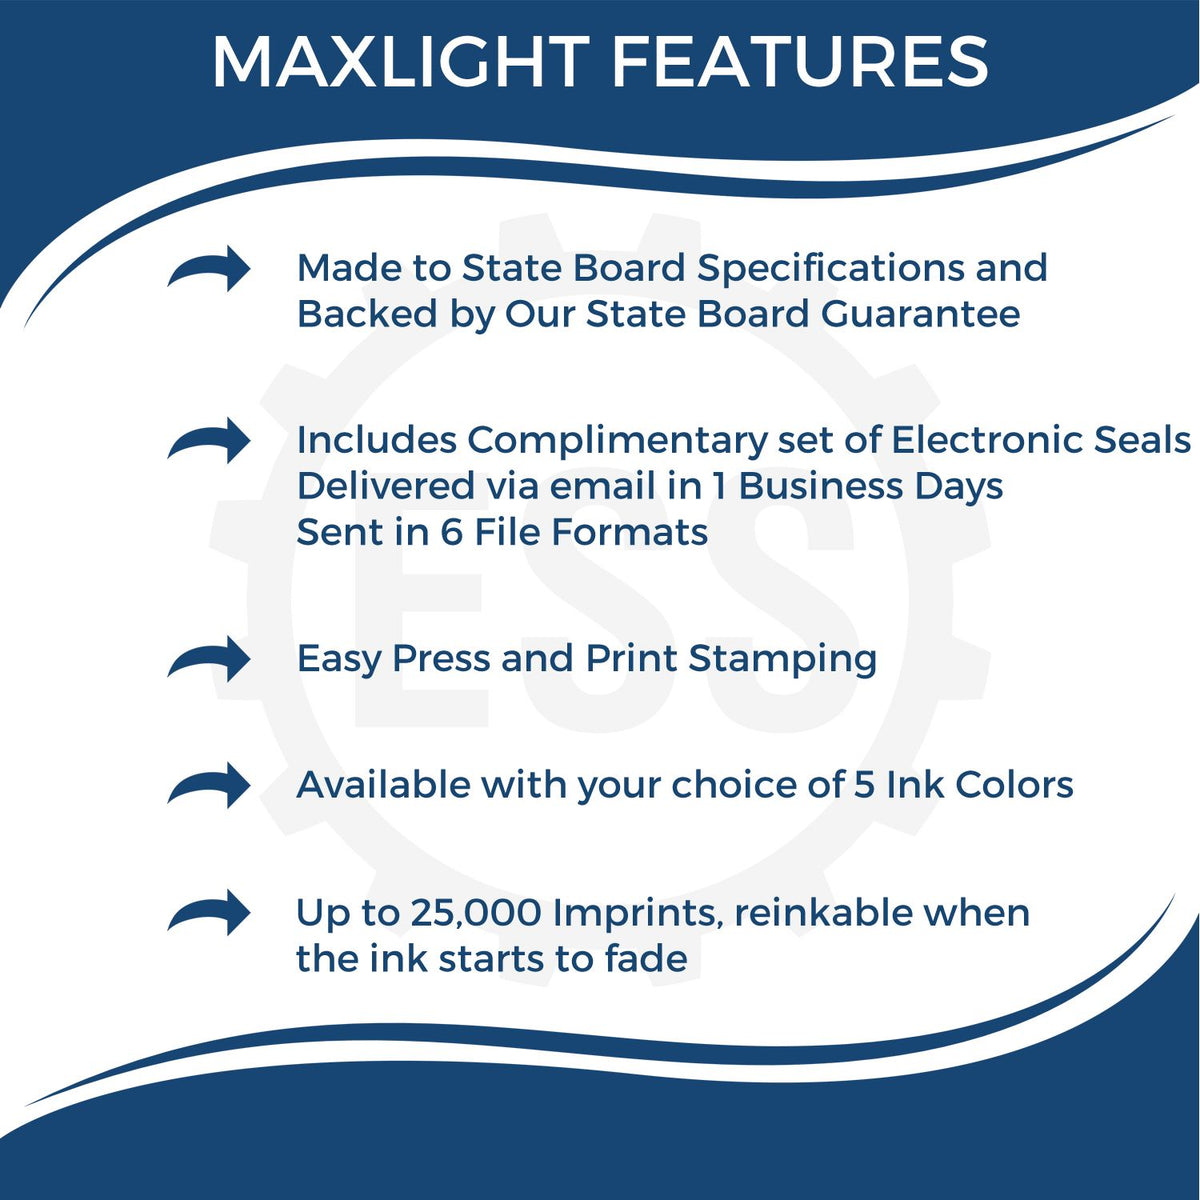 A picture of an infographic highlighting the selling points for the Premium MaxLight Pre-Inked Mississippi Landscape Architectural Stamp